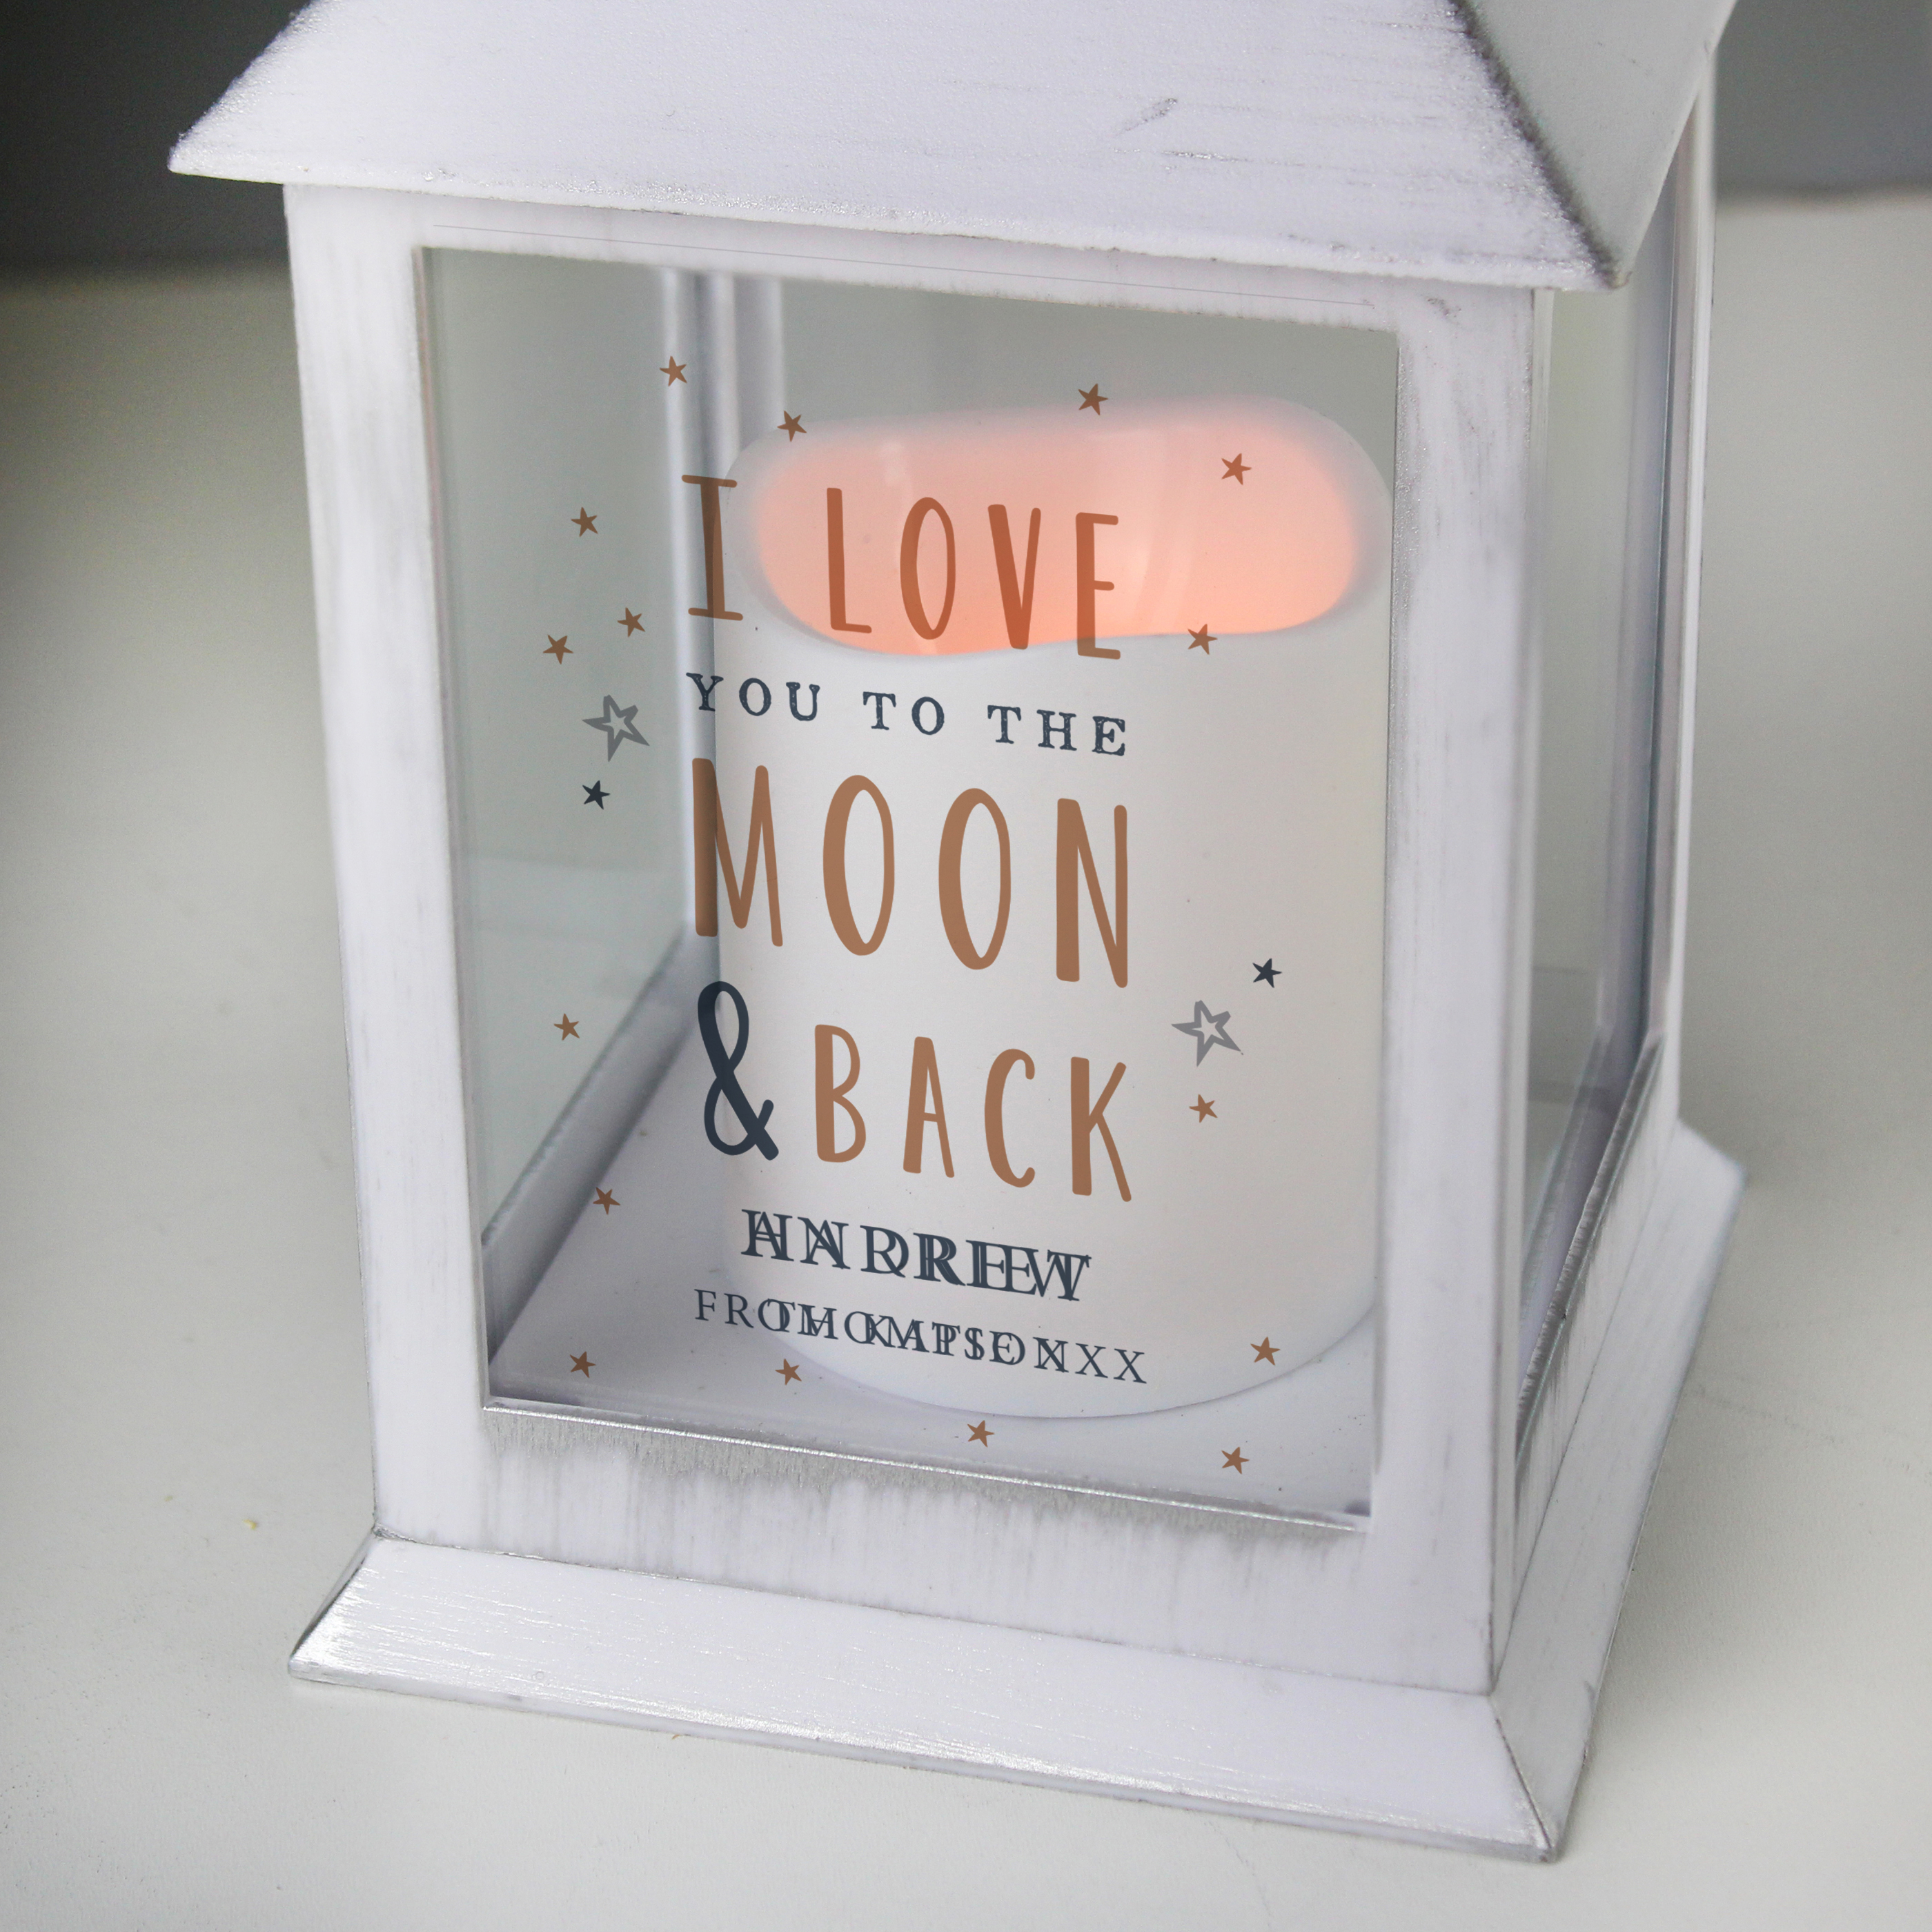 Personalised White LED Lantern - To The Moon and Back